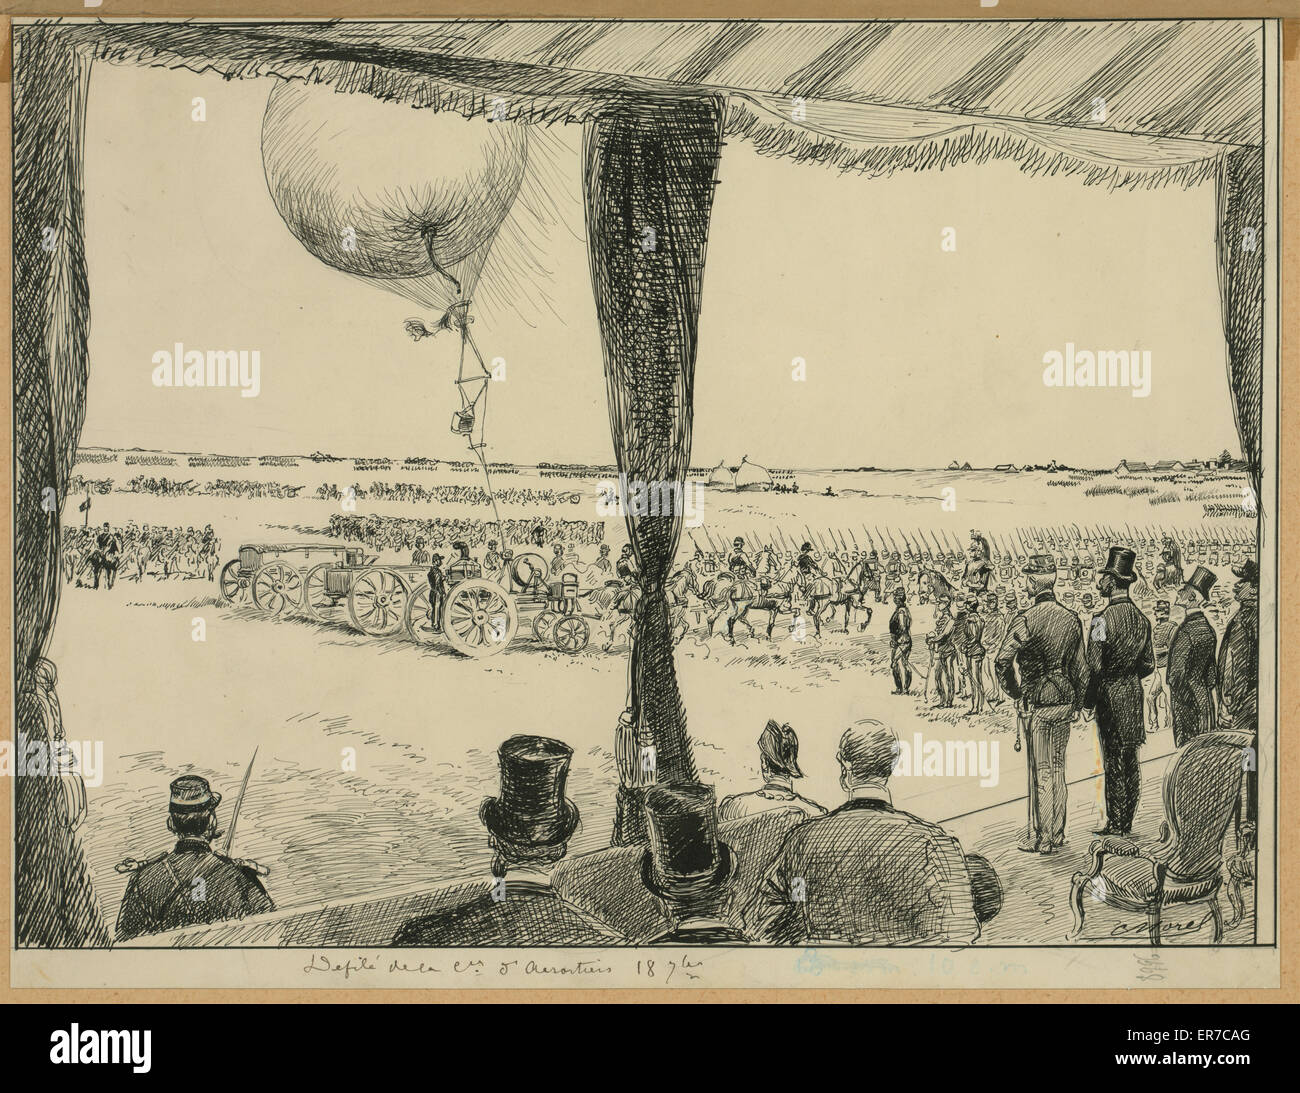 Defile de la Cm. d'aerostiers 187 Drawing shows a parade with one of the balloons used in the Siege of Paris (1870-71) and a group from the Compagnie des aerostiers militaires, with officials in a reviewing stand in the foreground. (Source: AG Renstrom, L Stock Photo